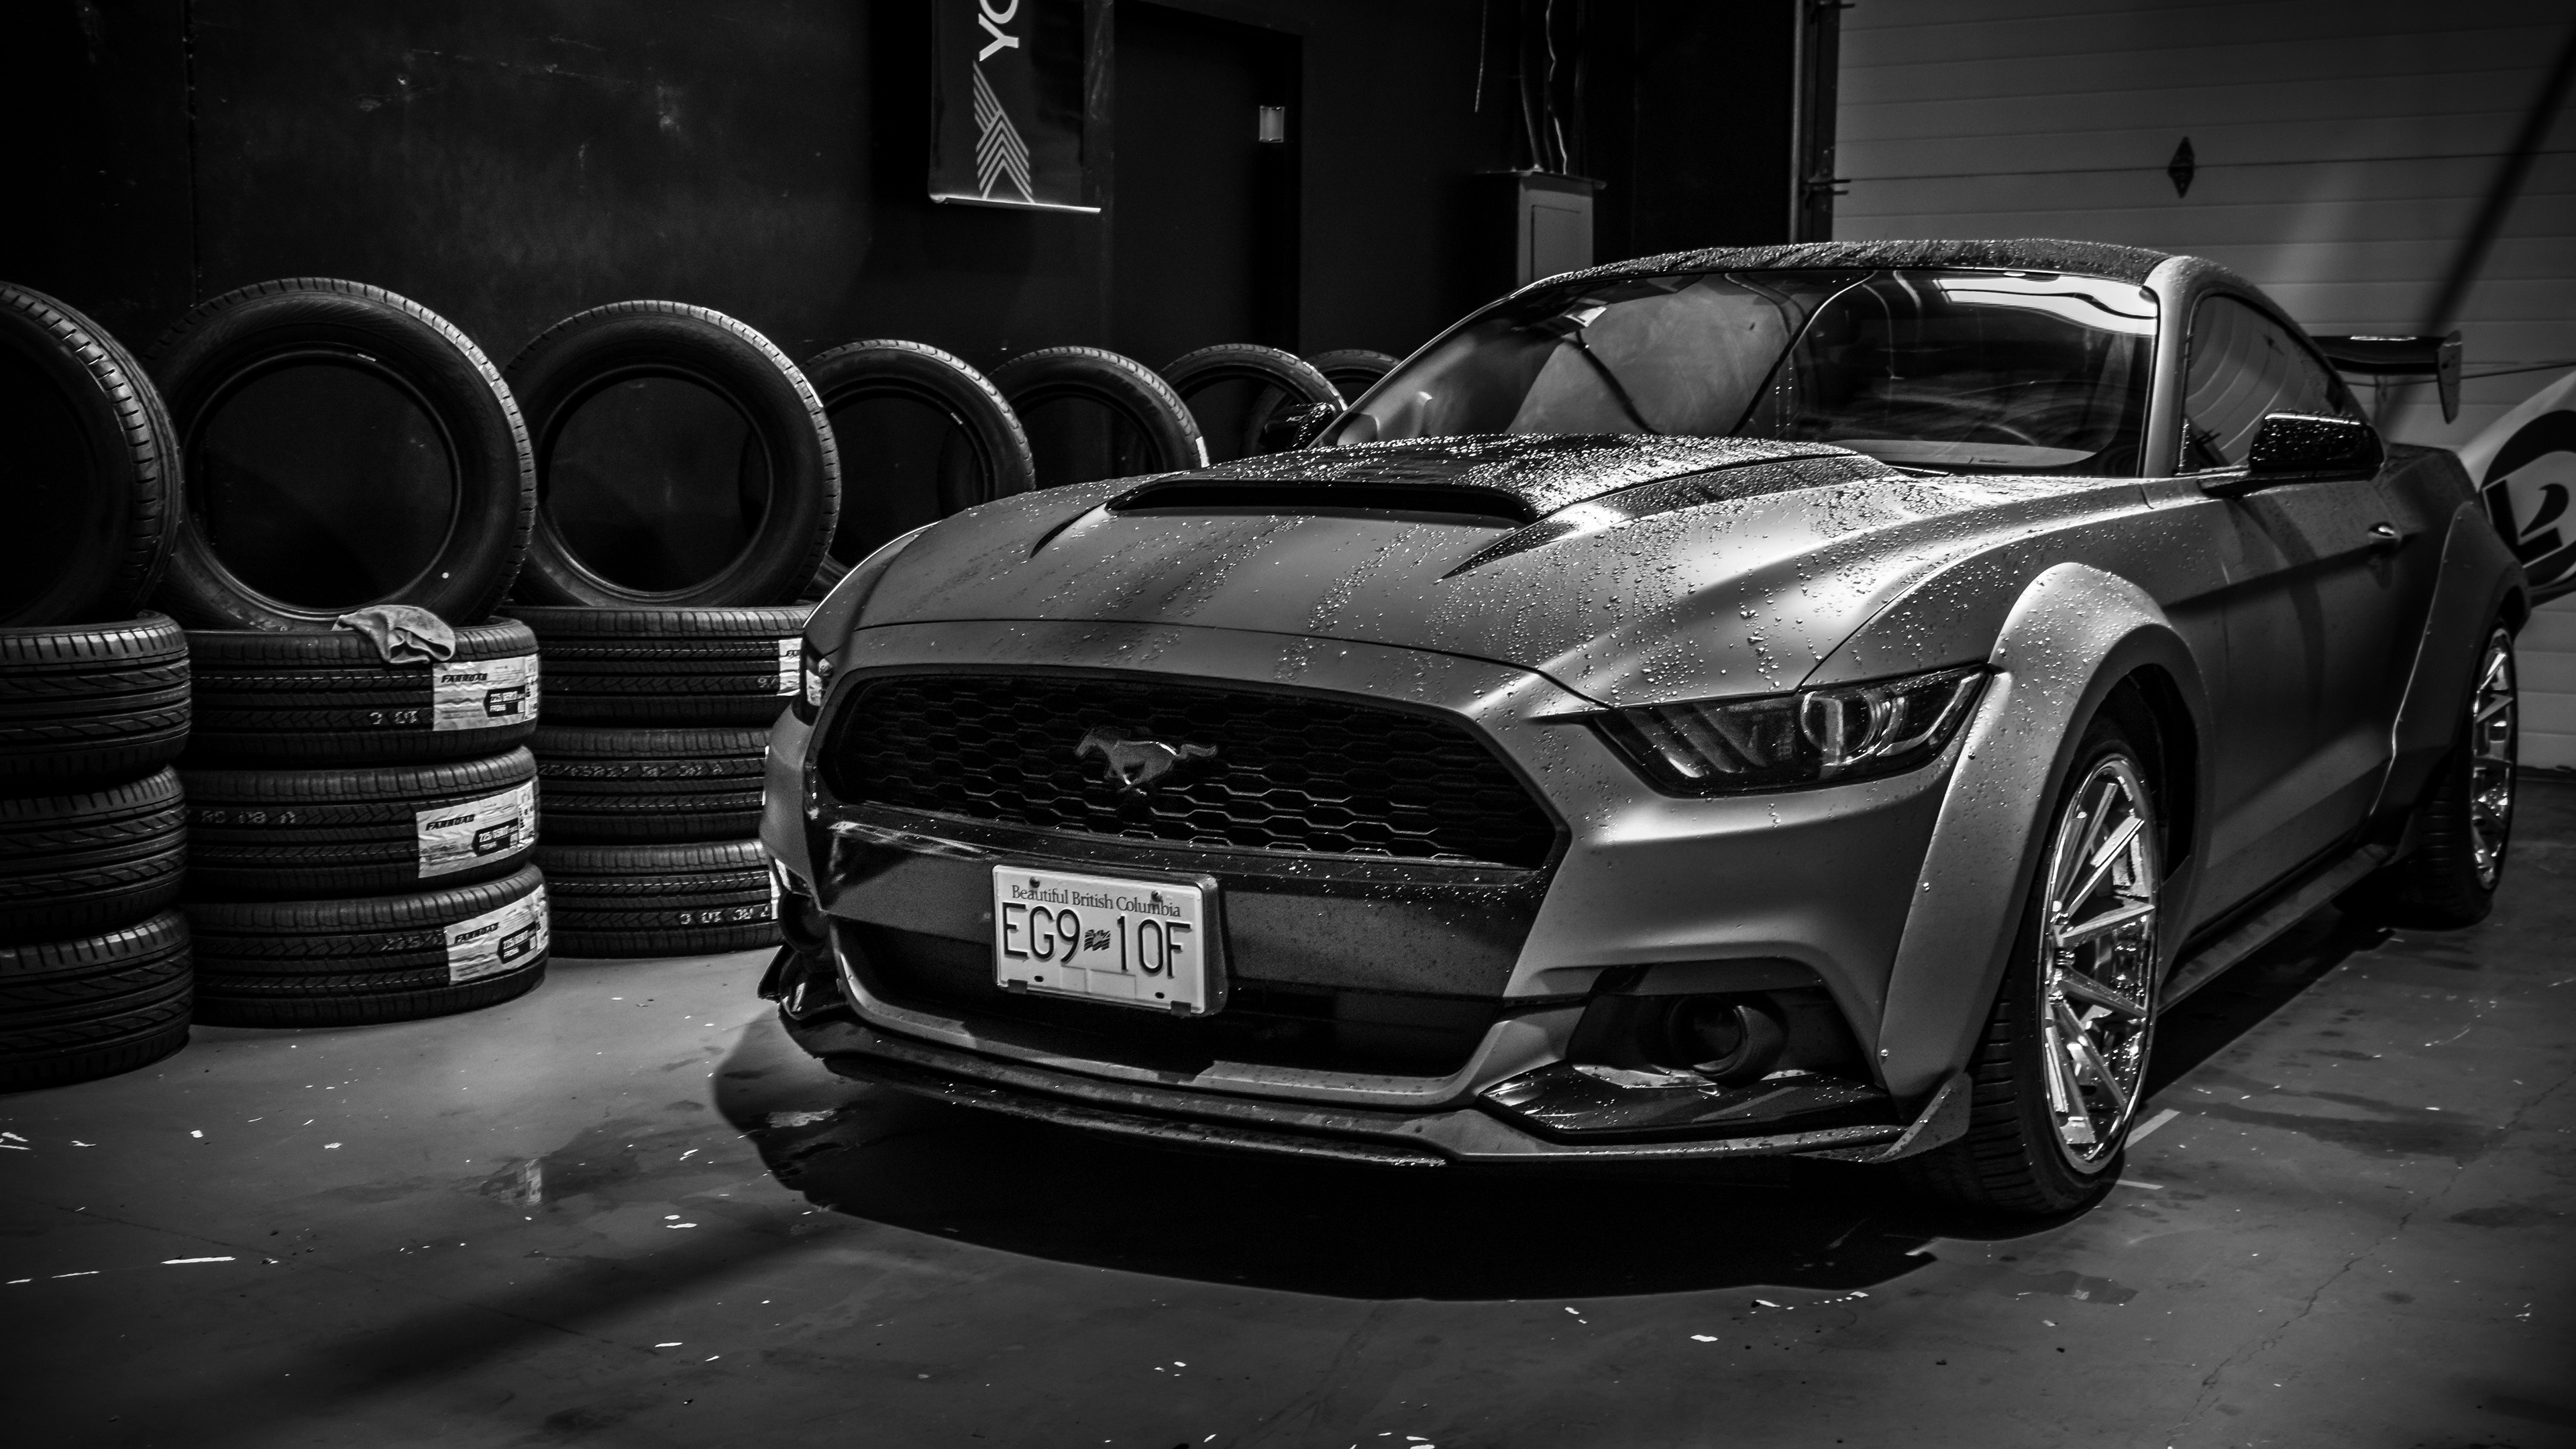 A black-and-white shot of a cool Ford Mustang